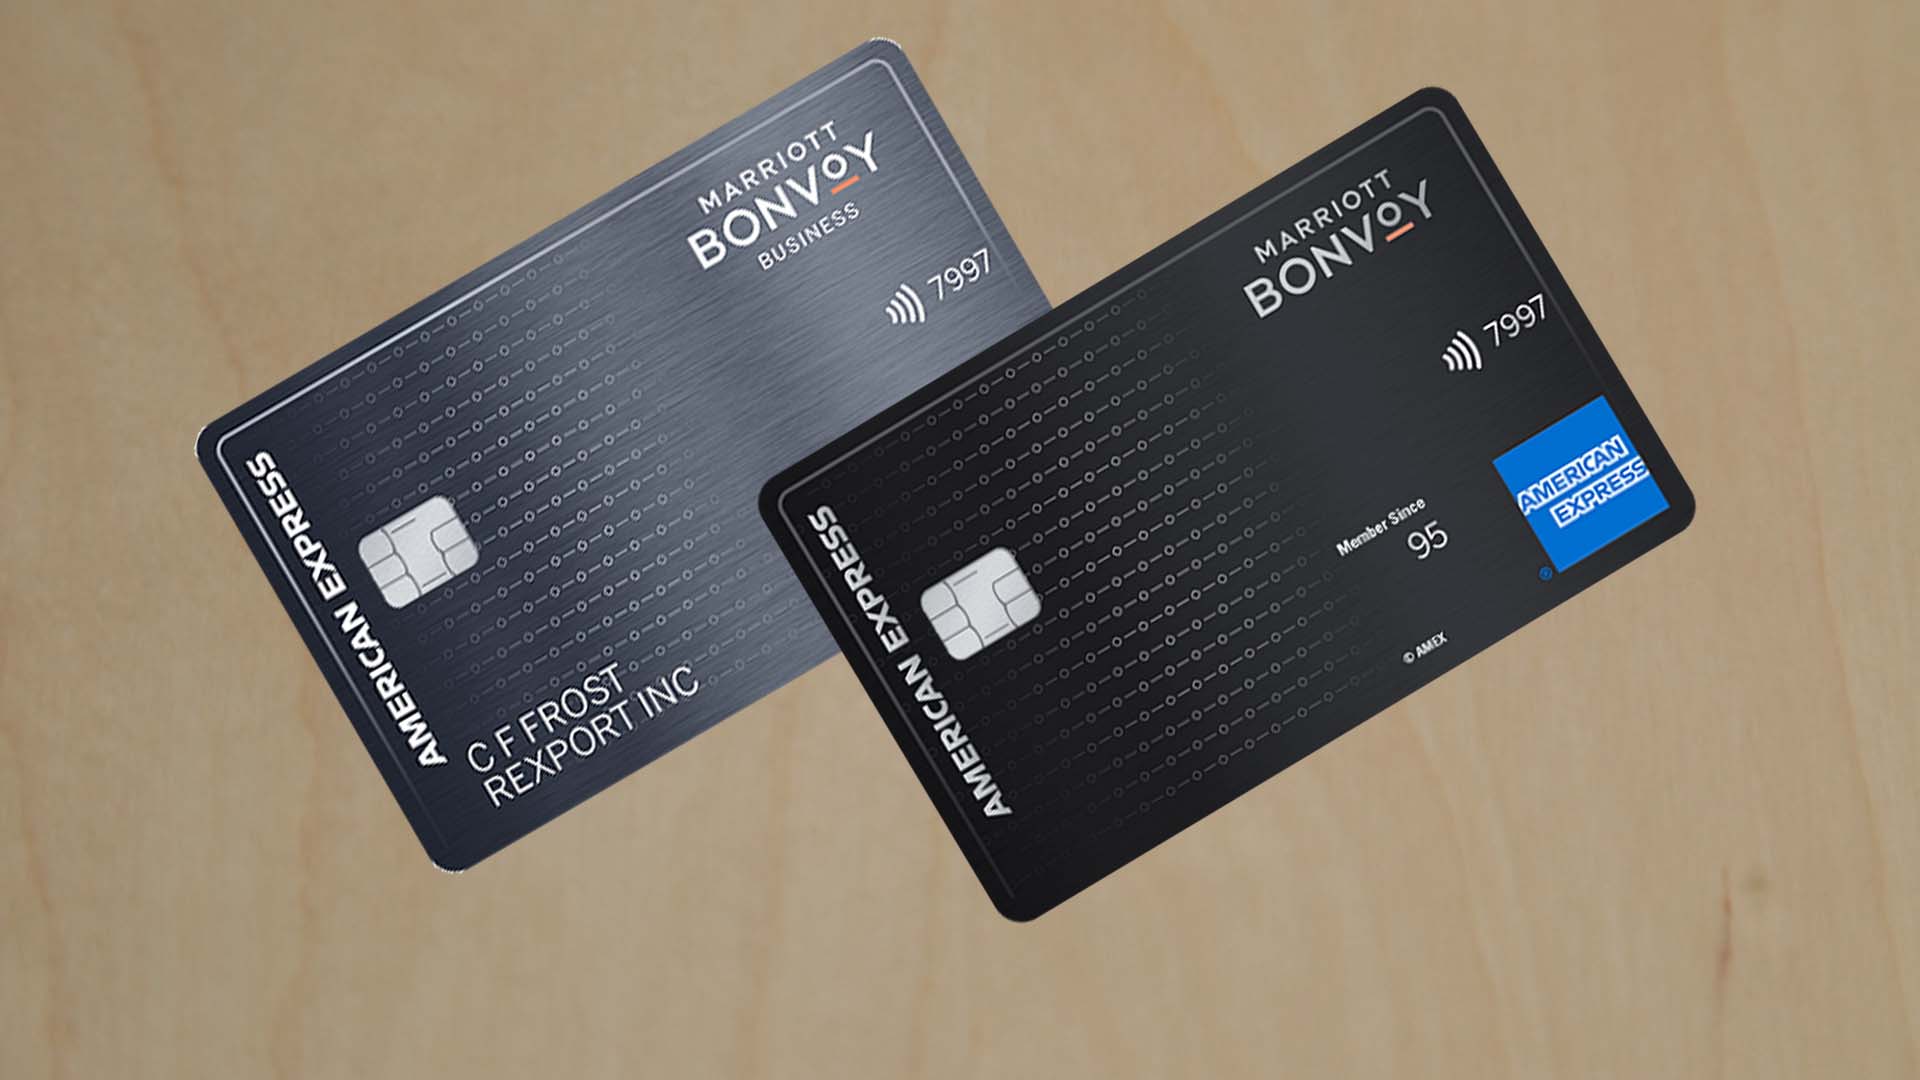 The two Marriott Bonvoy Amex cards